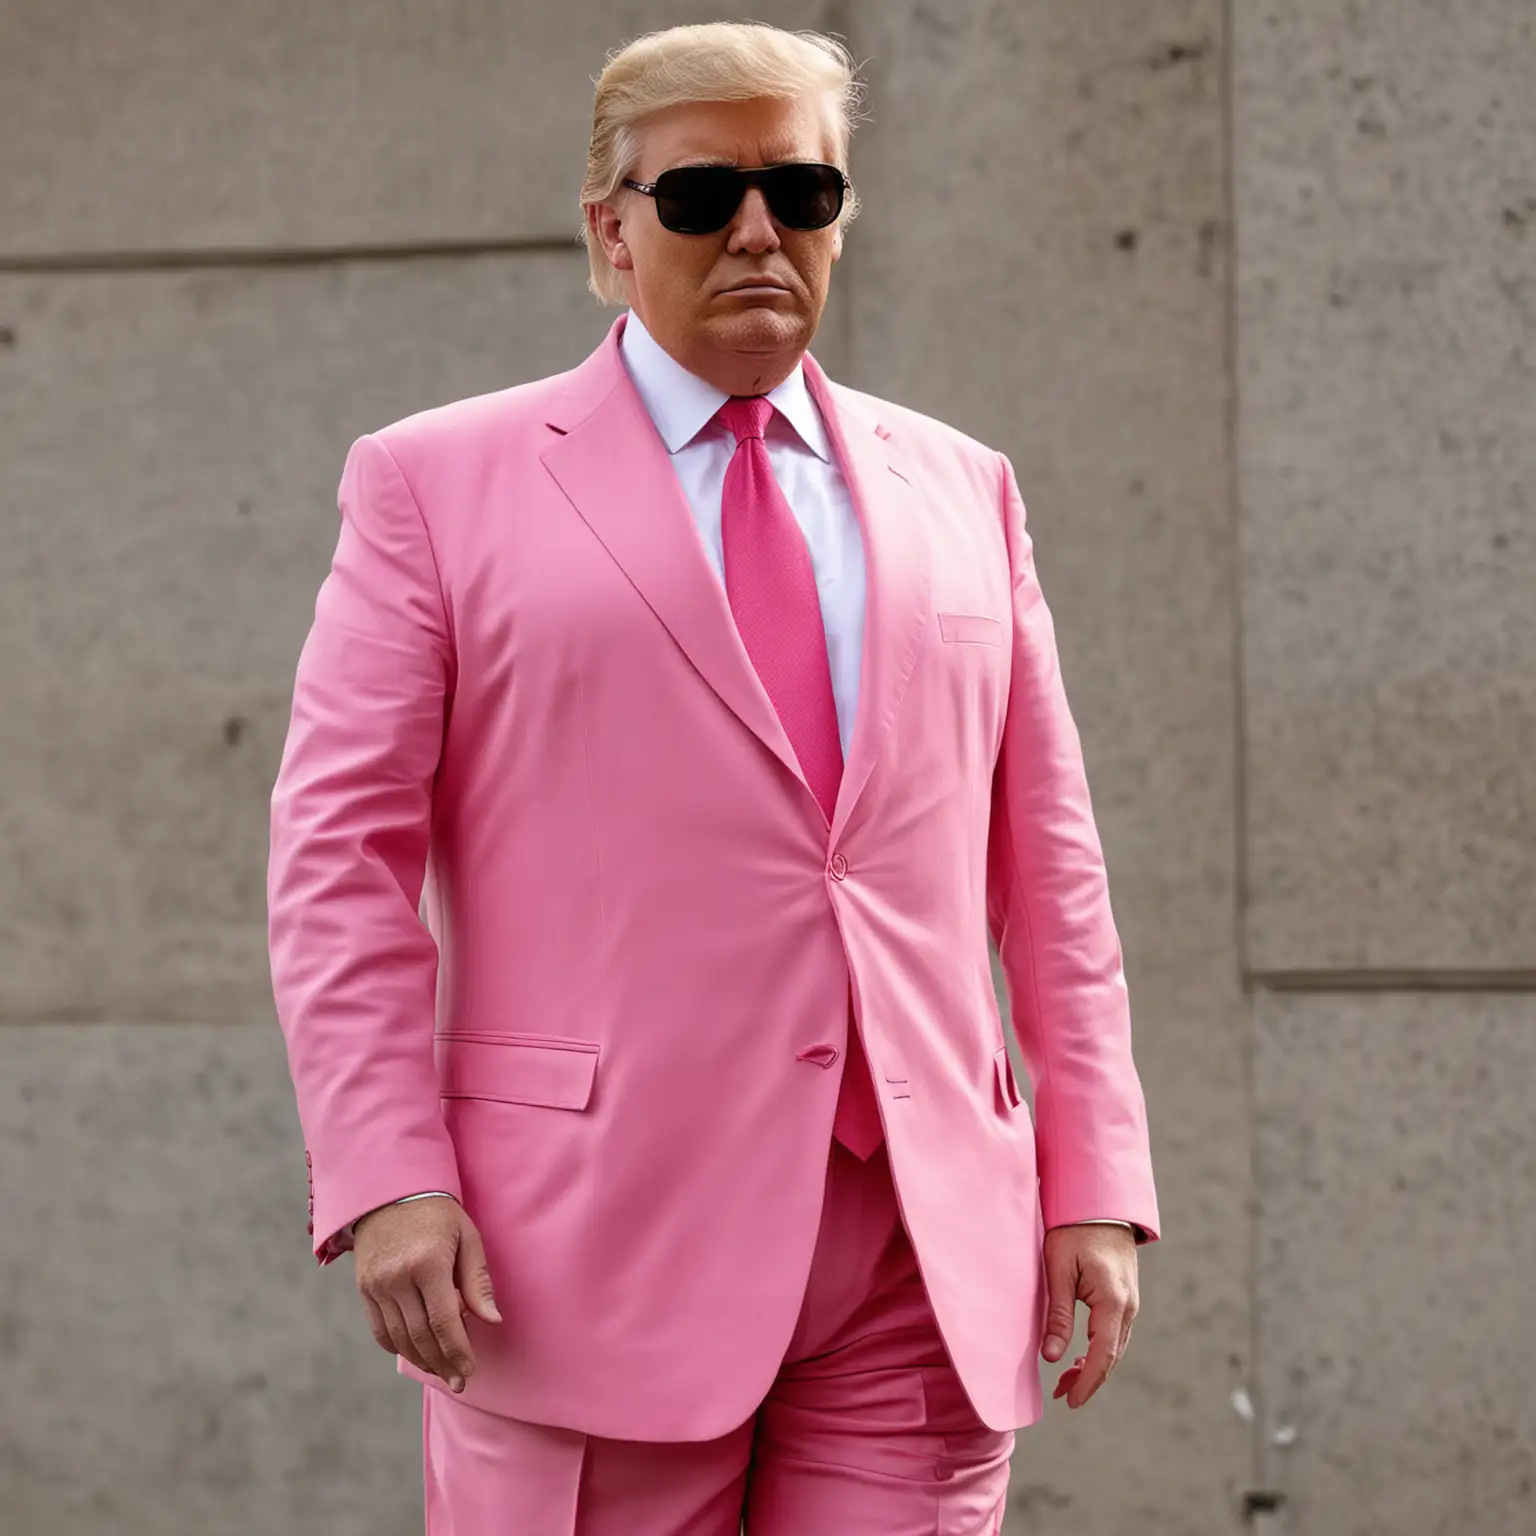 Donald trump in pink suit and sunglasses